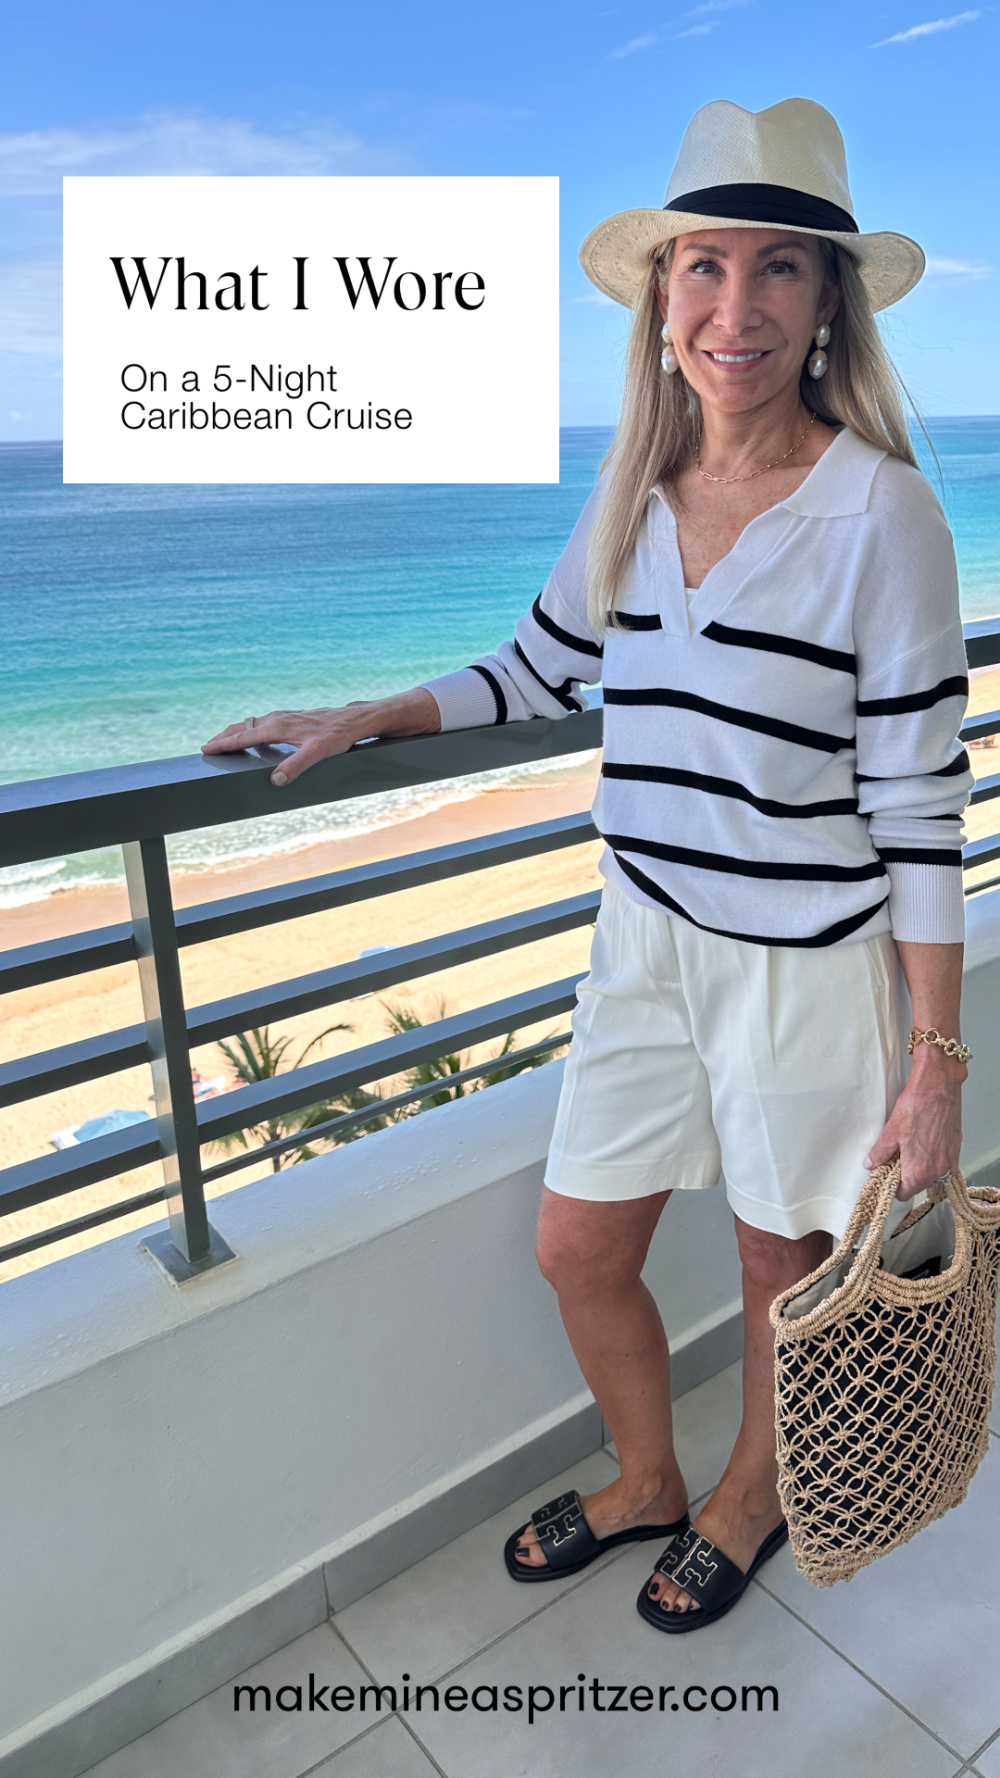 What I Wore on a Caribbean Cruise pin collage.